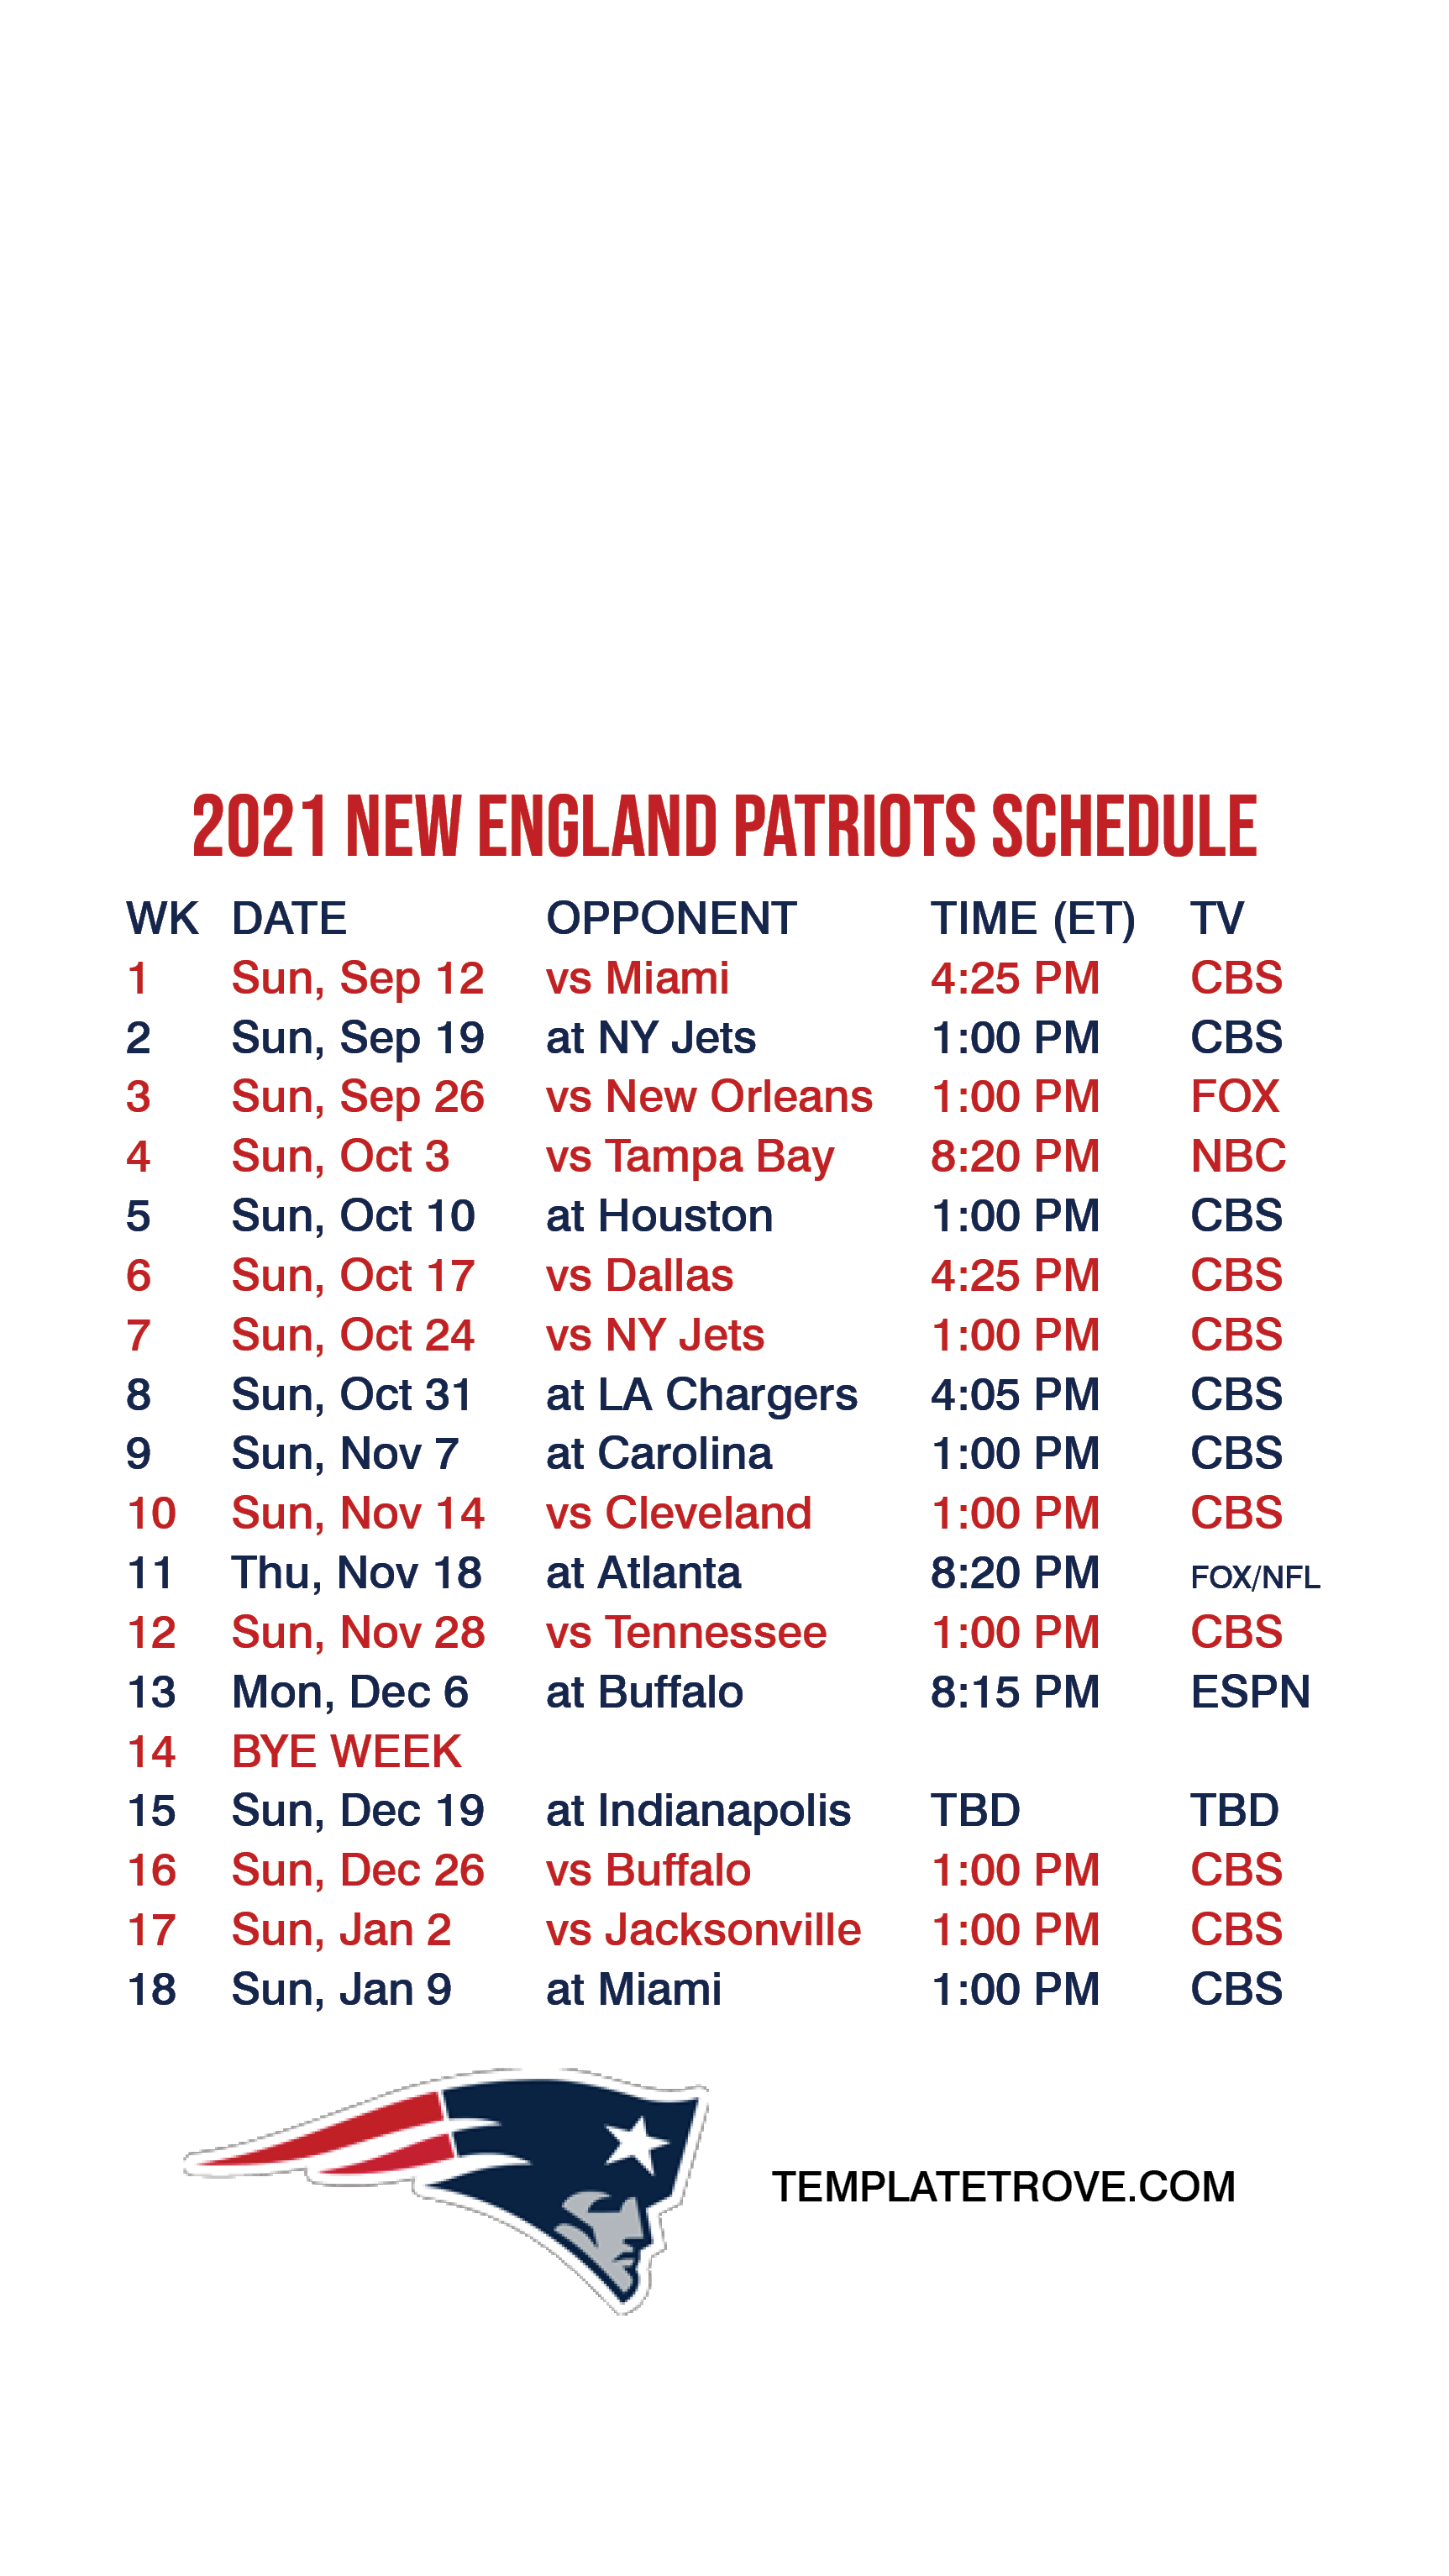 2021 2022 New England Patriots Lock Screen Schedule For IPhone 6 7 8 Plus